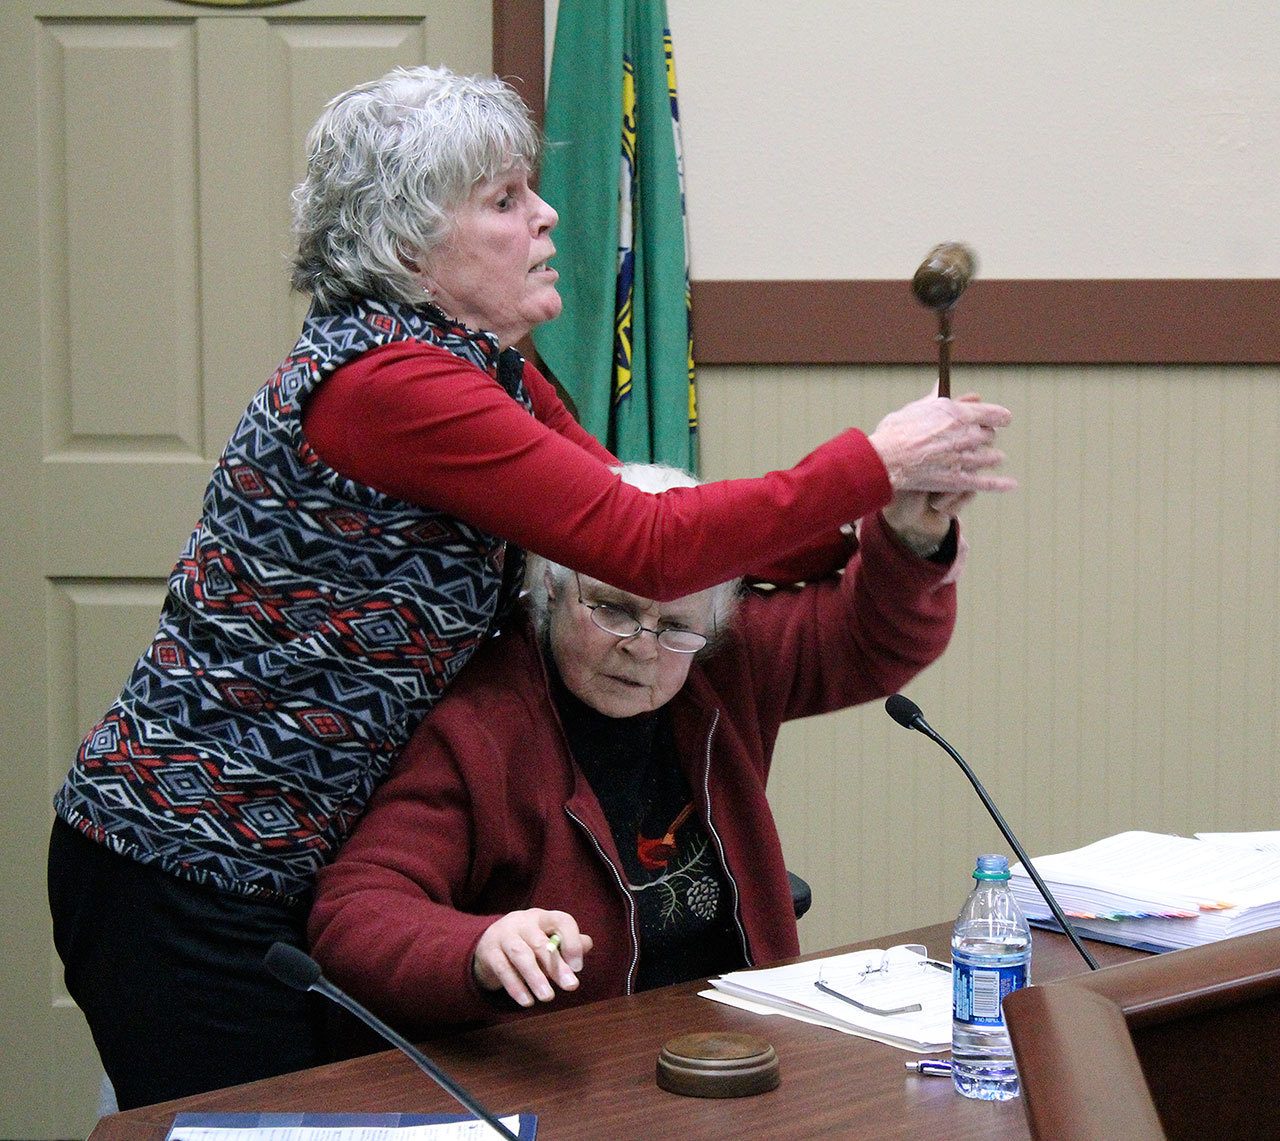 During a recess called by Mayor Carol Benson, Mayor Pro Tempore Erika Morgan took Benson’s seat as chair and attempted to continue the council meeting. Benson wrested the gavel from Morgan as Black Diamond police officers stepped in. Ray Still, The Reporter